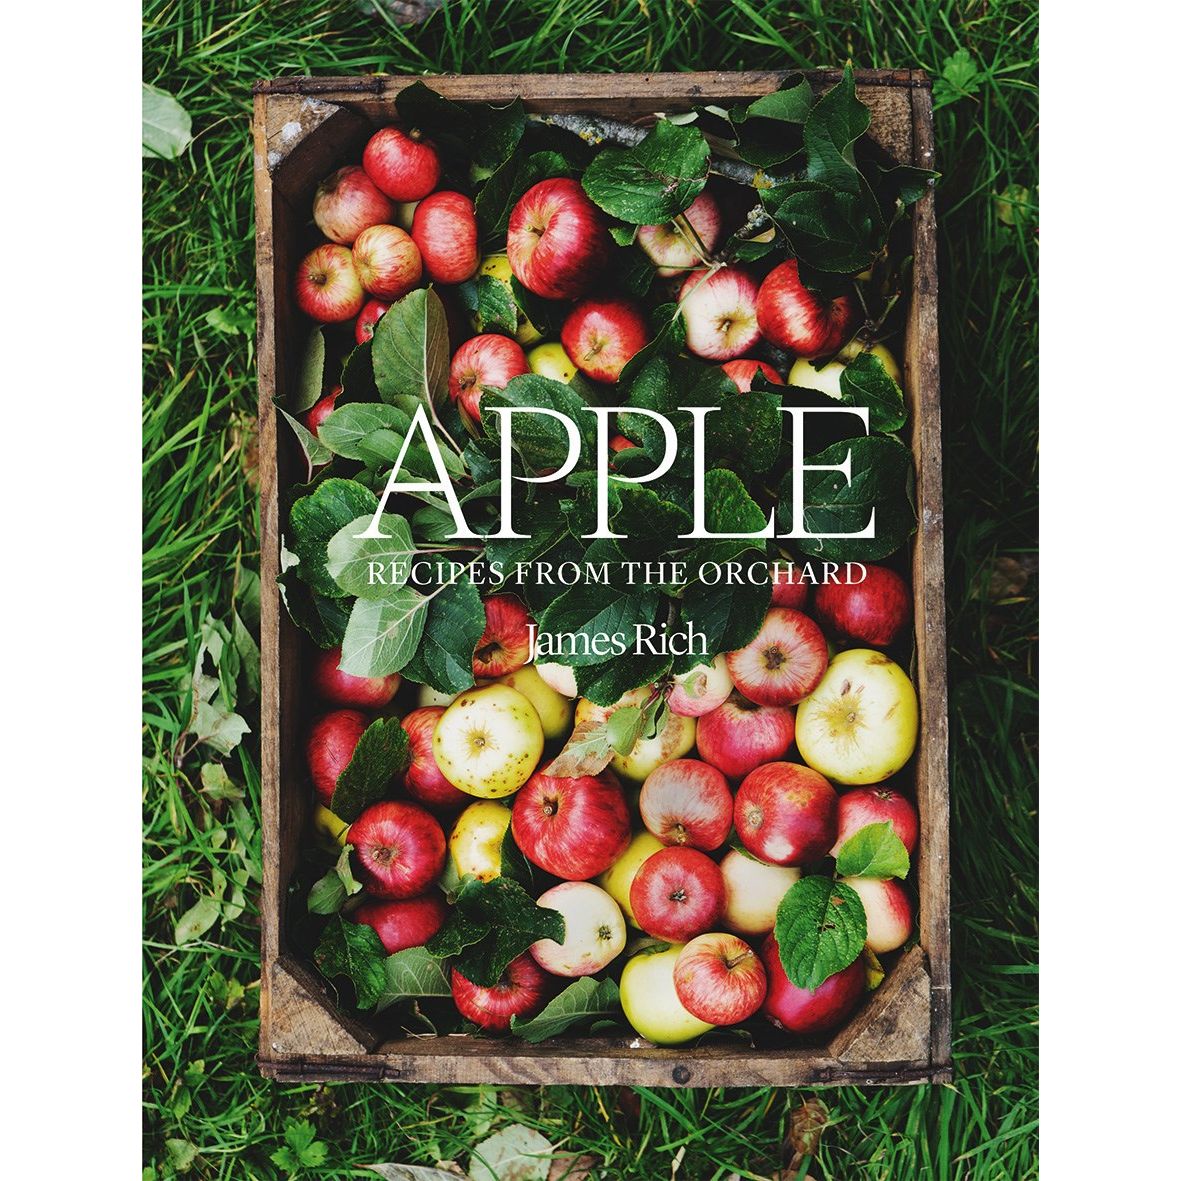 Apple: Recipes from the Orchard (James Rich)